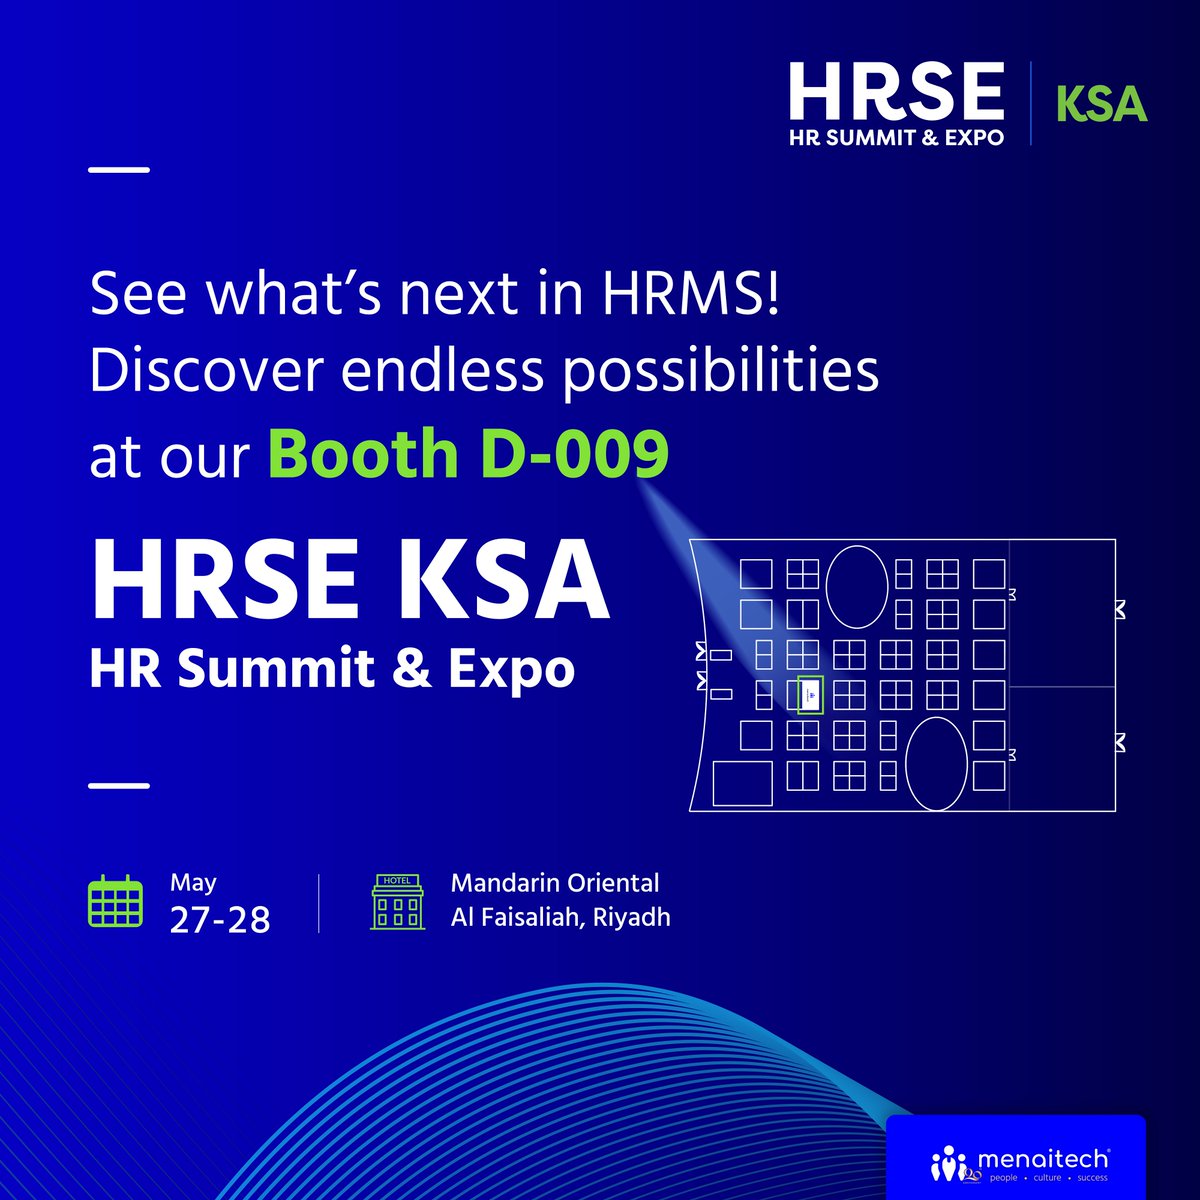 If you’re visiting #HRSE #KSA (HR Summit & Expo) in #Riyadh, don’t miss out on our Booth!
Discover Menaitech’s cutting-edge HR solutions and see how we can help streamline and enhance your HR operations. Looking forward to connecting with you!
.
.
#HRSEKSA #HRMS #HRmanagement